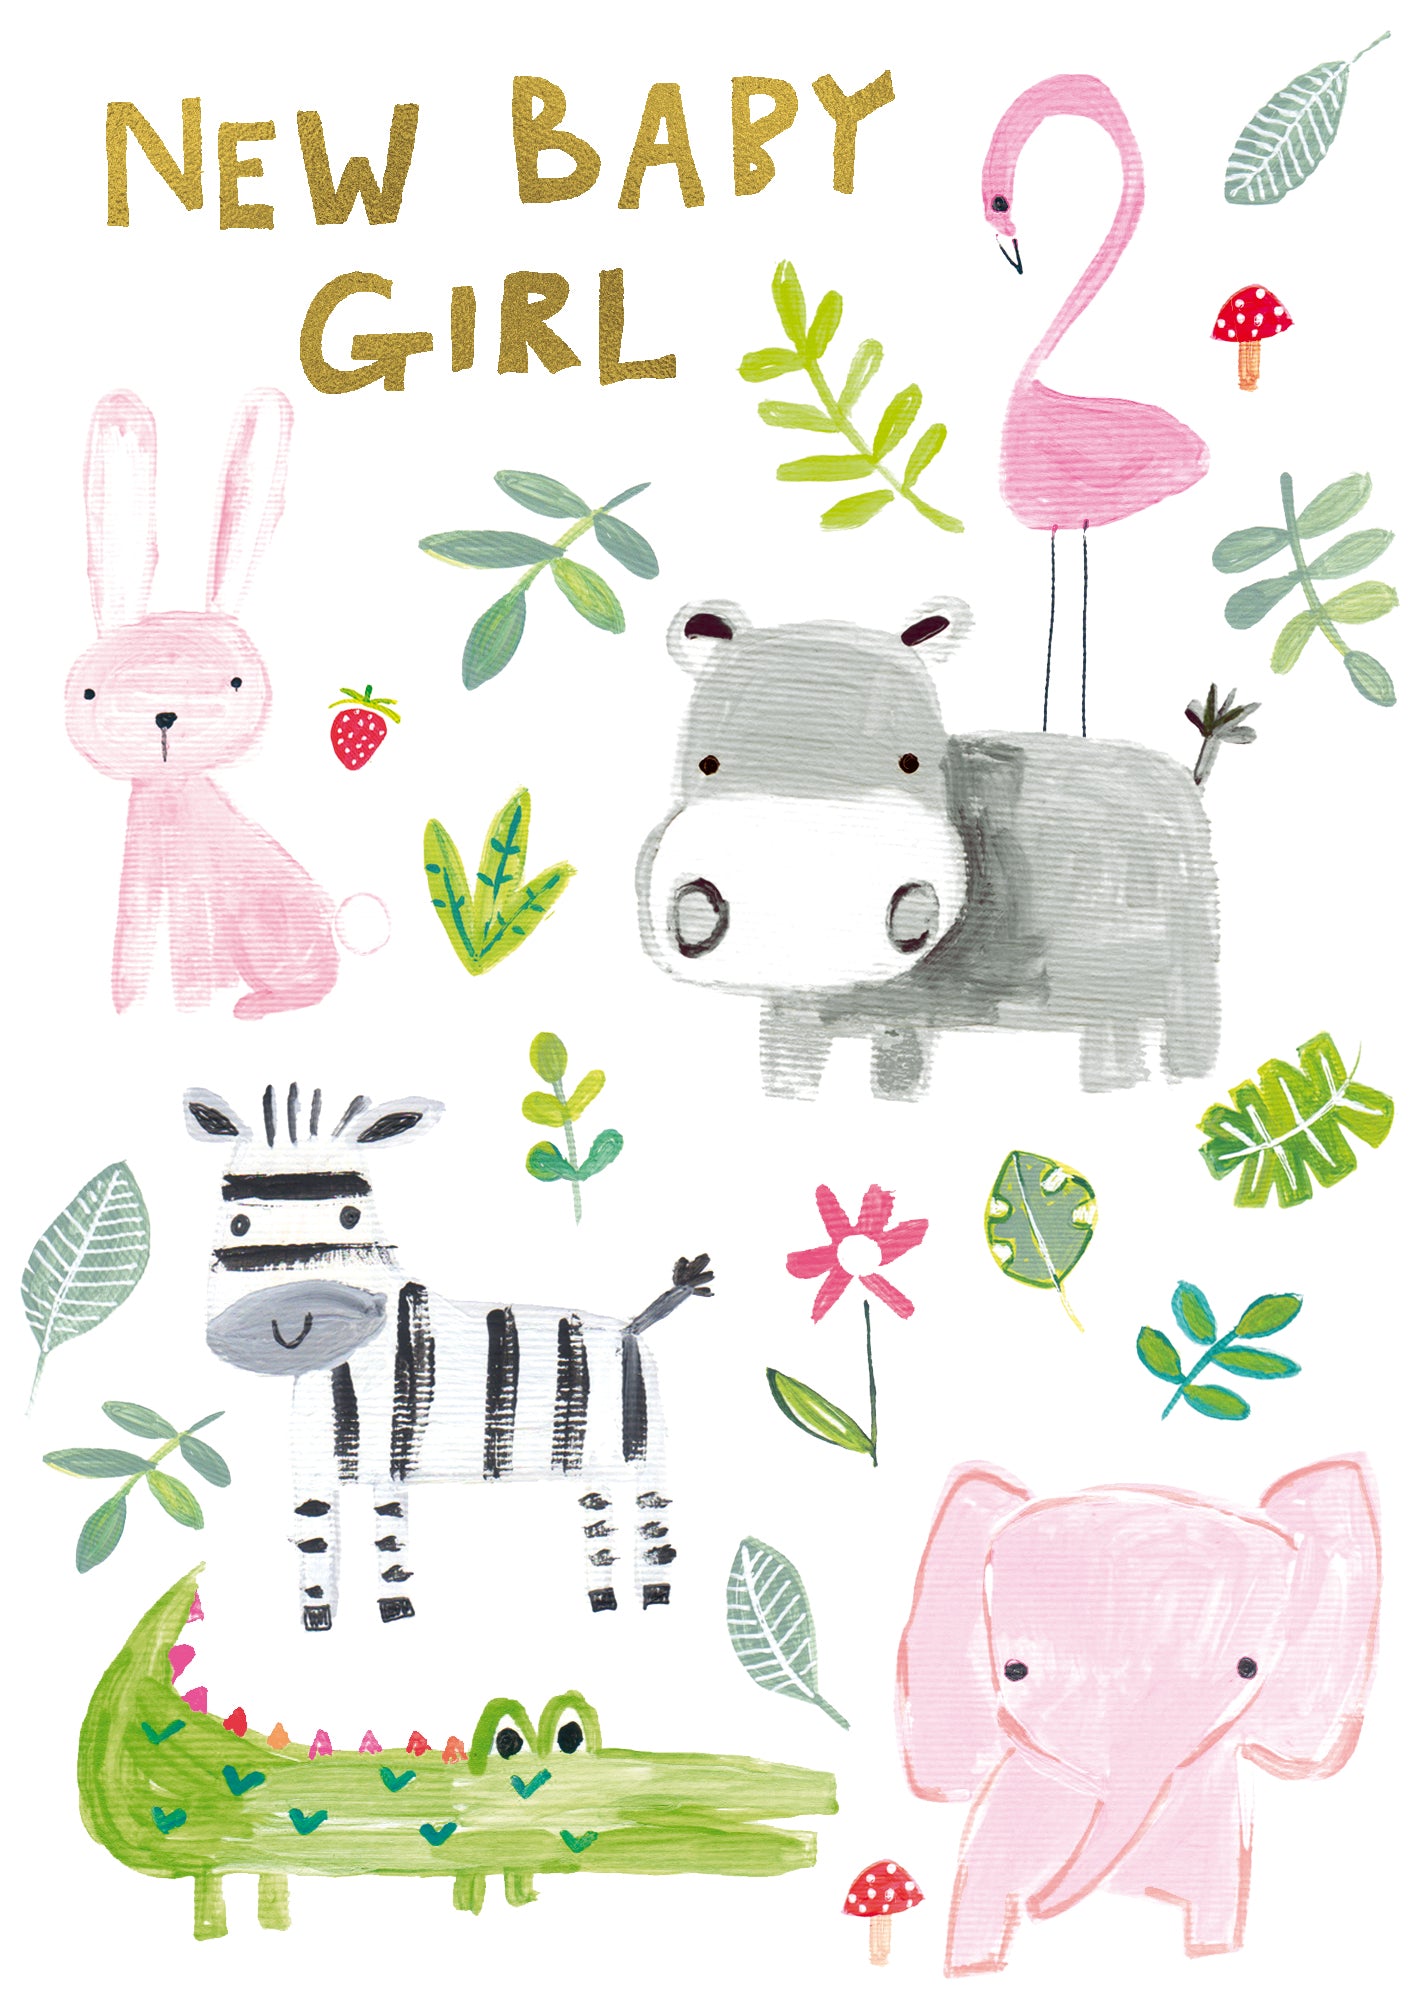 New Baby Girl Safari Card from Penny Black